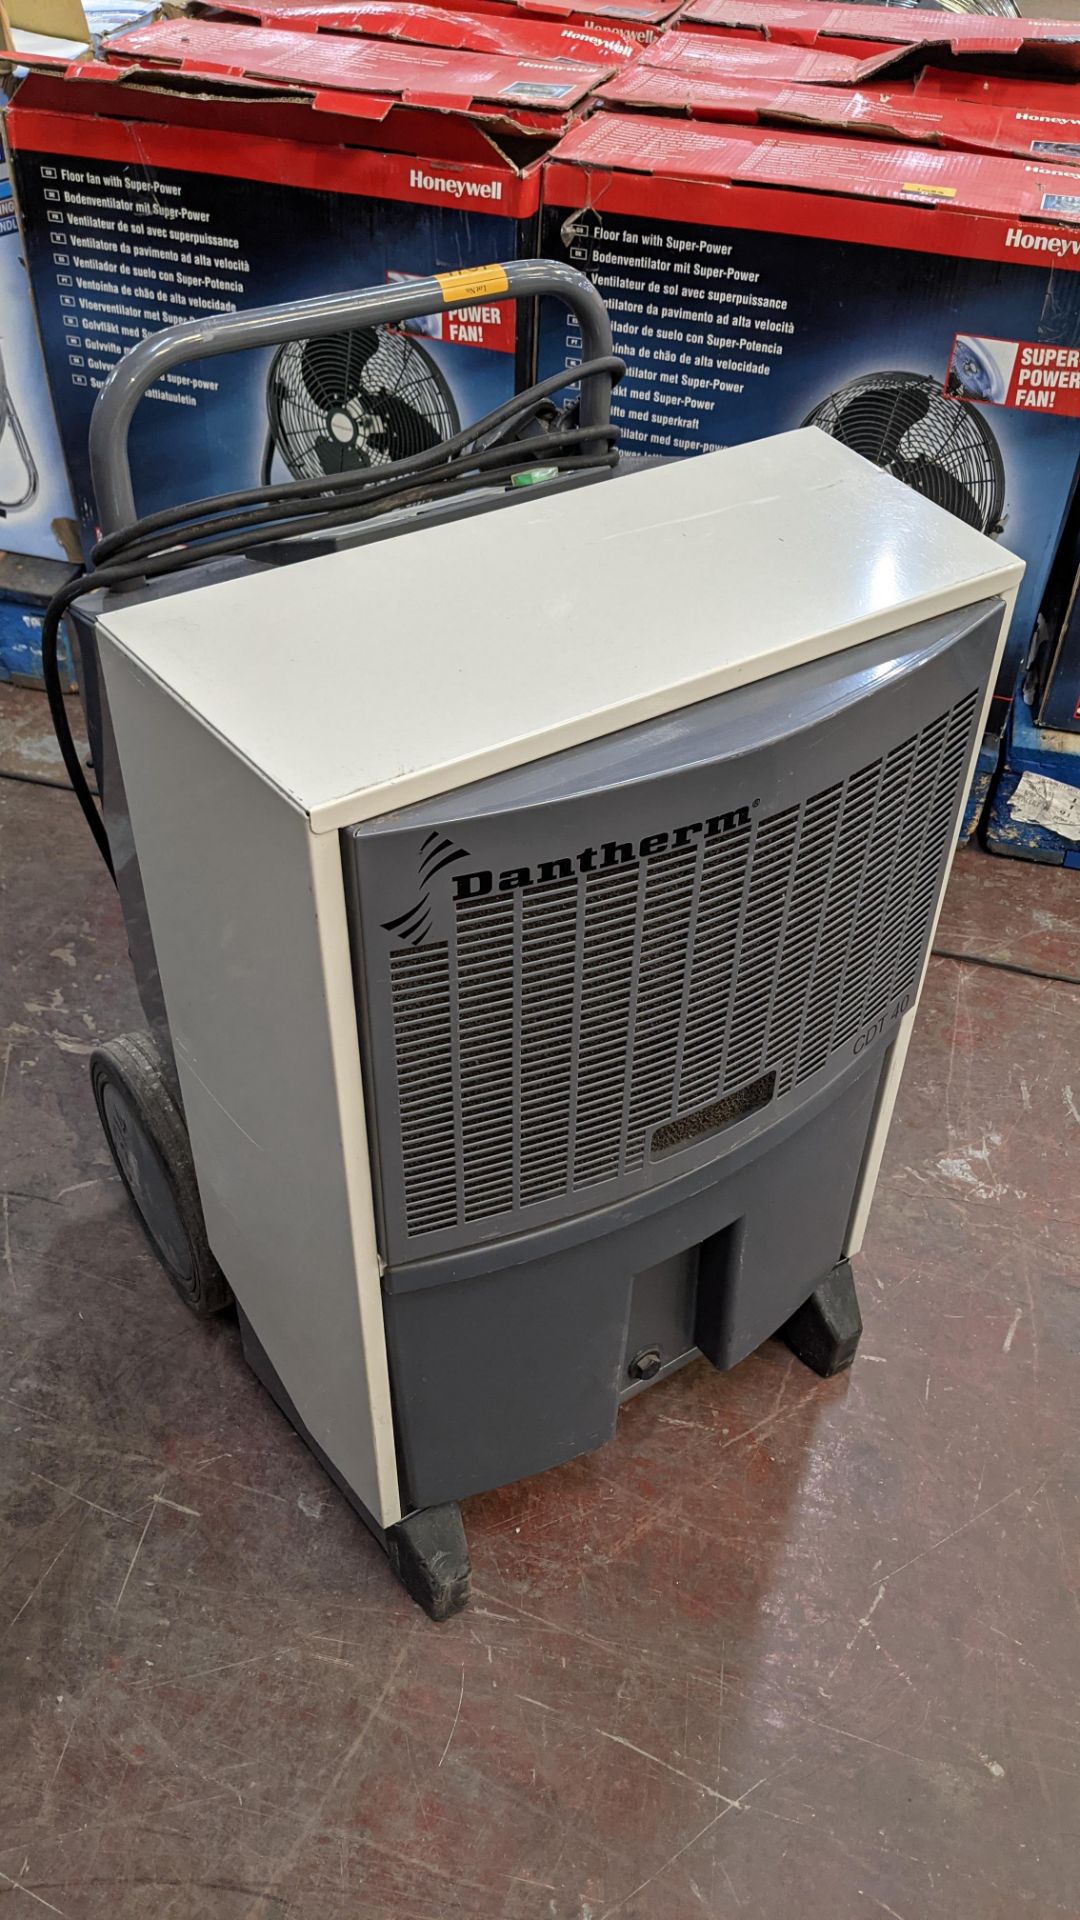 Dantherm model CDT40 dehumidifier. 12,985 recorded hours - Image 12 of 12